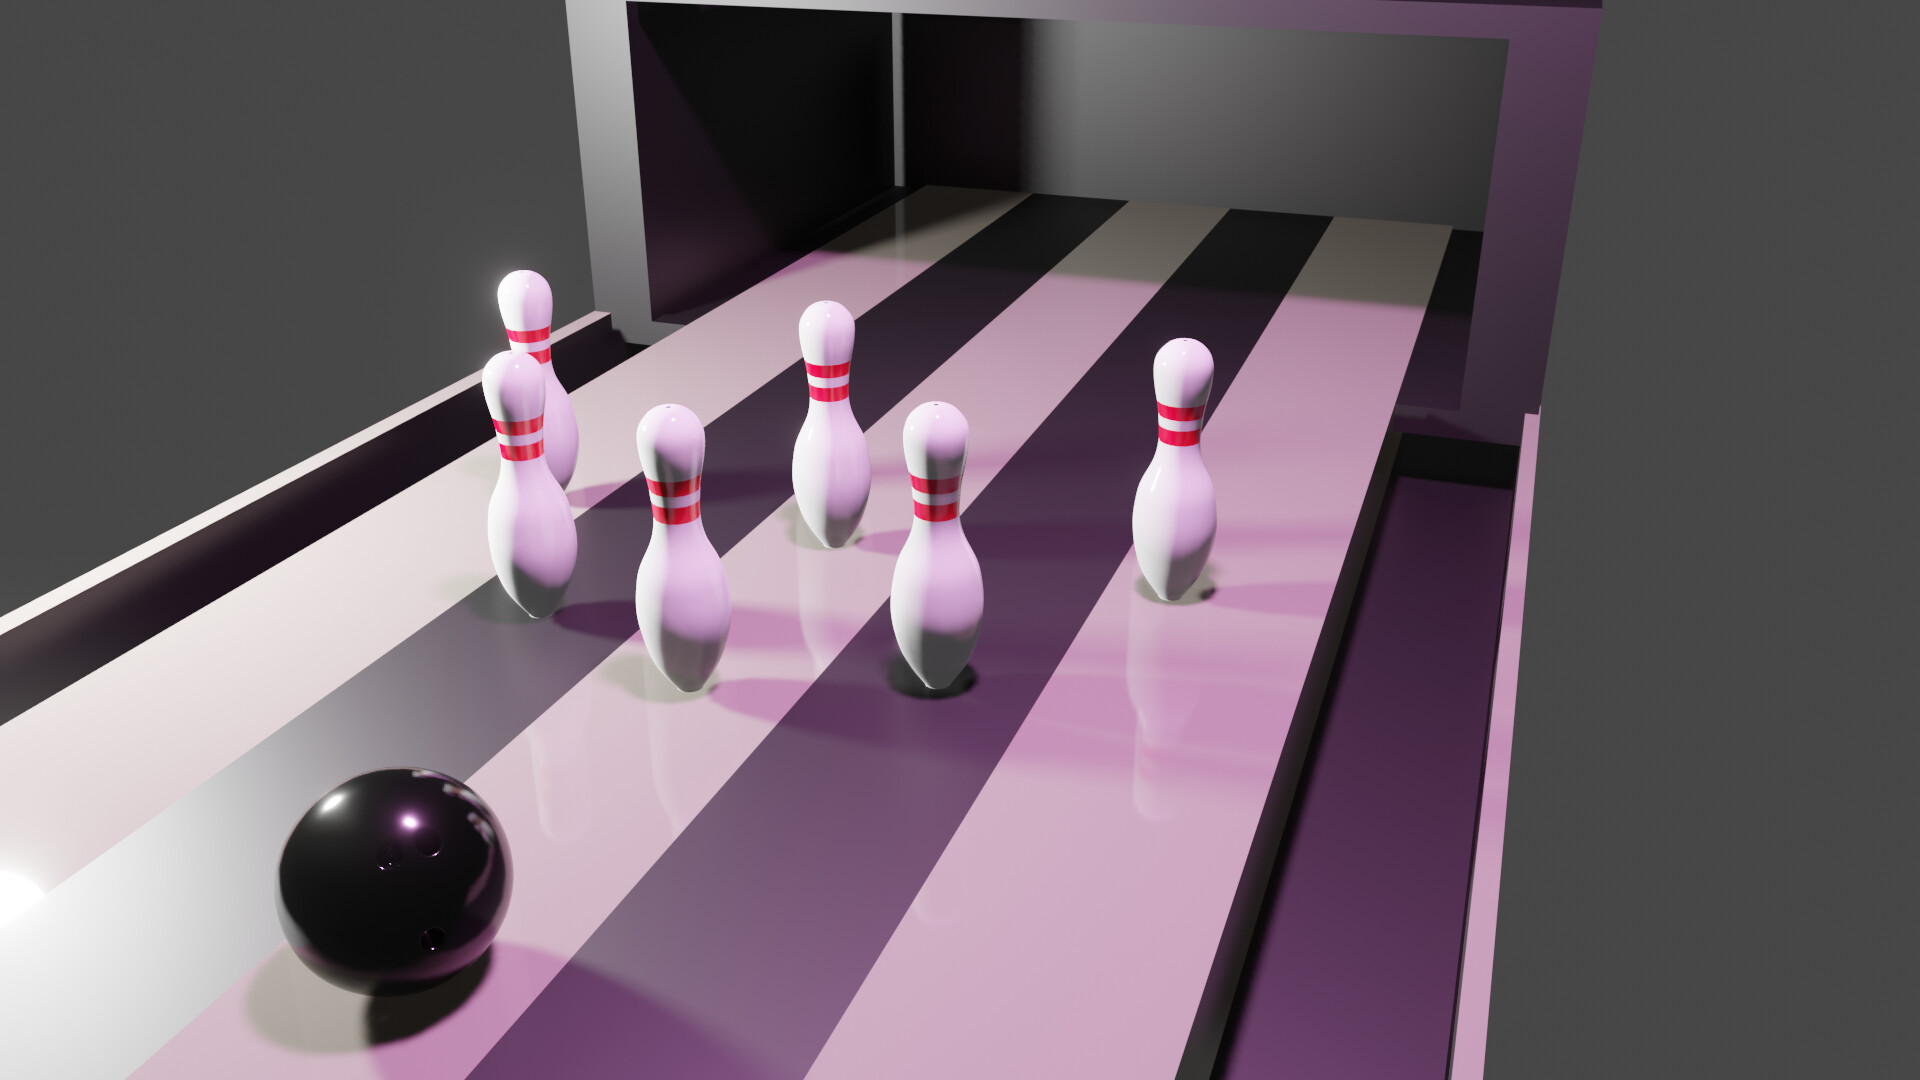 4K Bowling Alley! - Show